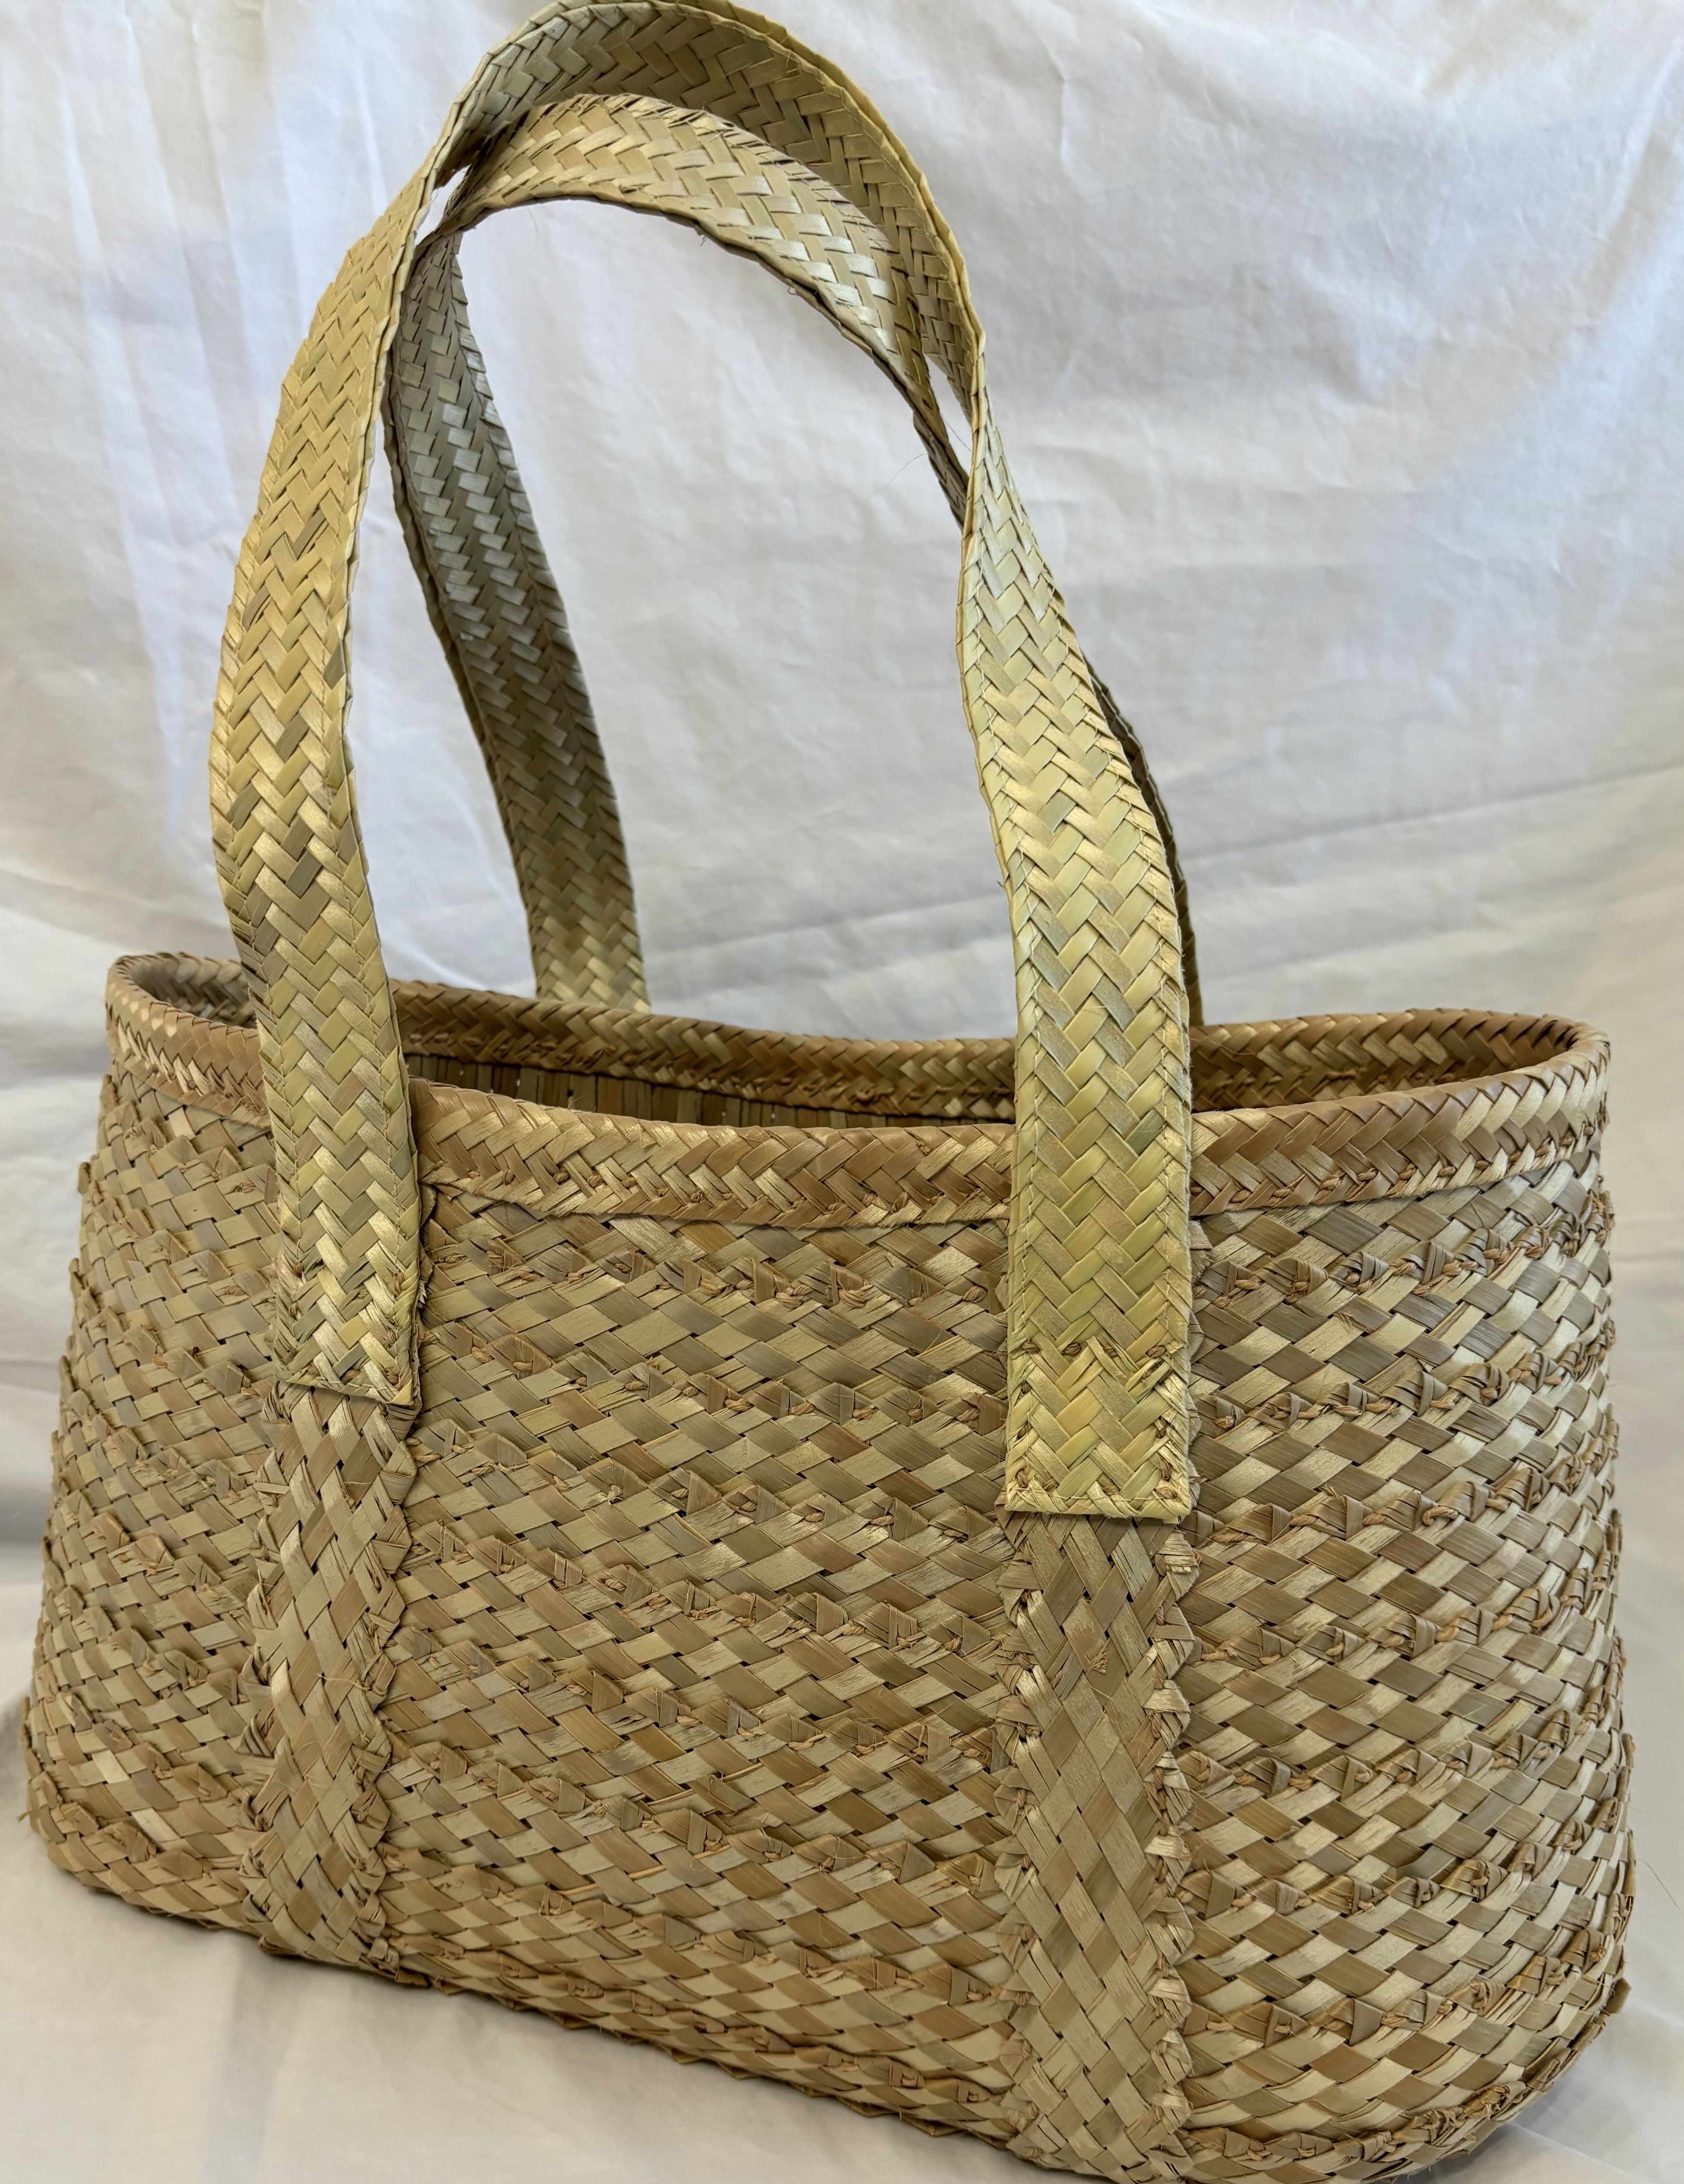 Handmade One-Of-a-Kind Thatched Basket #1